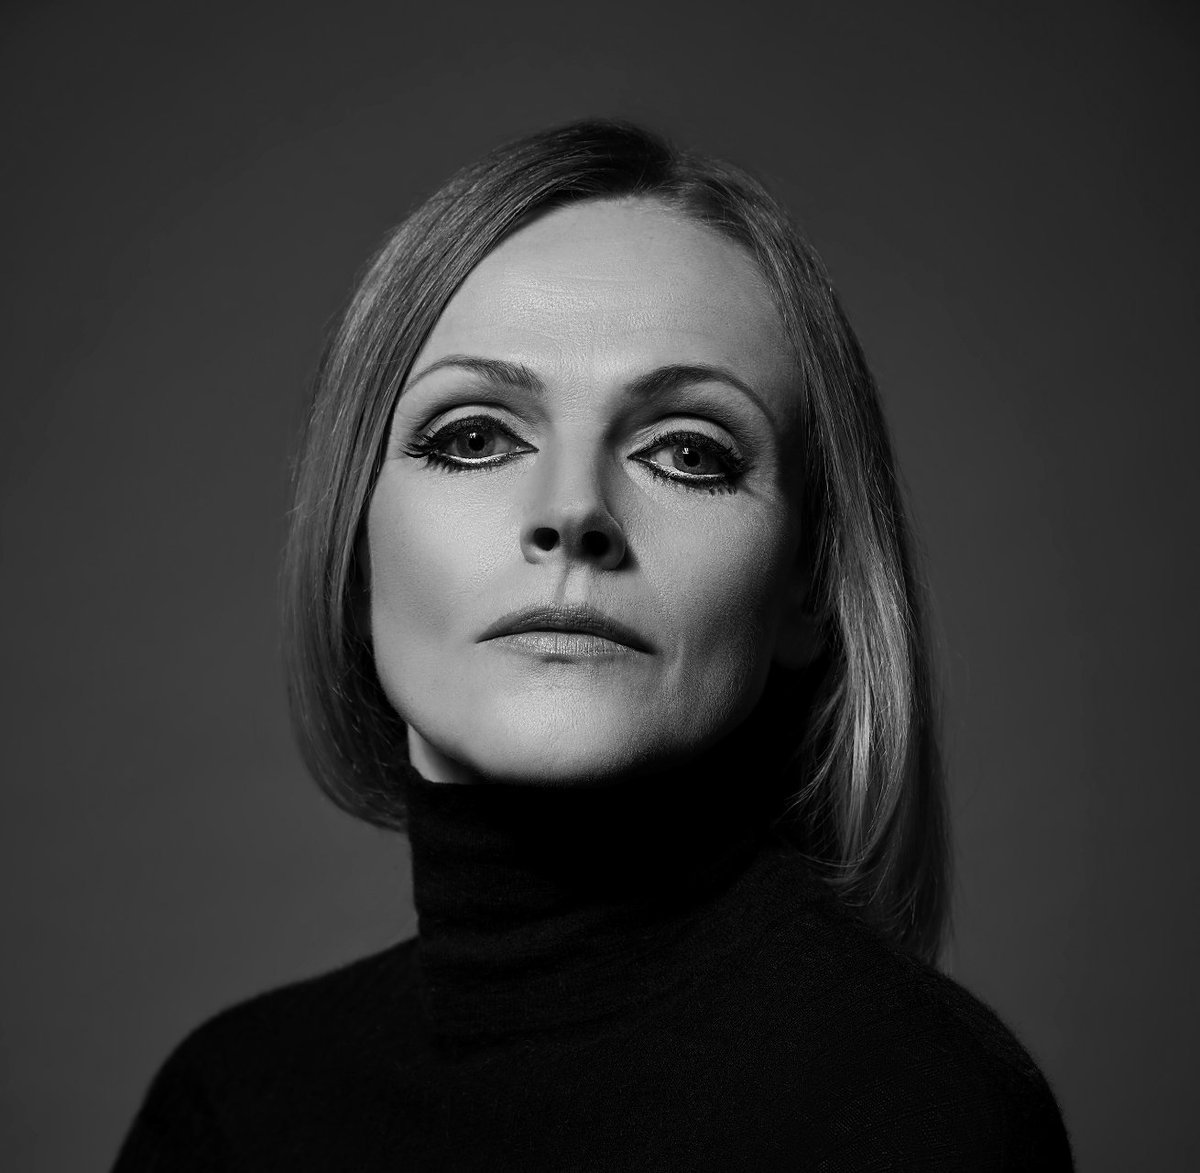 For the headline event of our IWD celebrations we'll be letting the conversation flow between two inspirational women; @coseyfannitutti, the pioneering musician & performance artist and acclaimed actress & writer @MPeakeOfficial. Tomorrow at 20:00 GMT - bit.ly/SS_IWD21